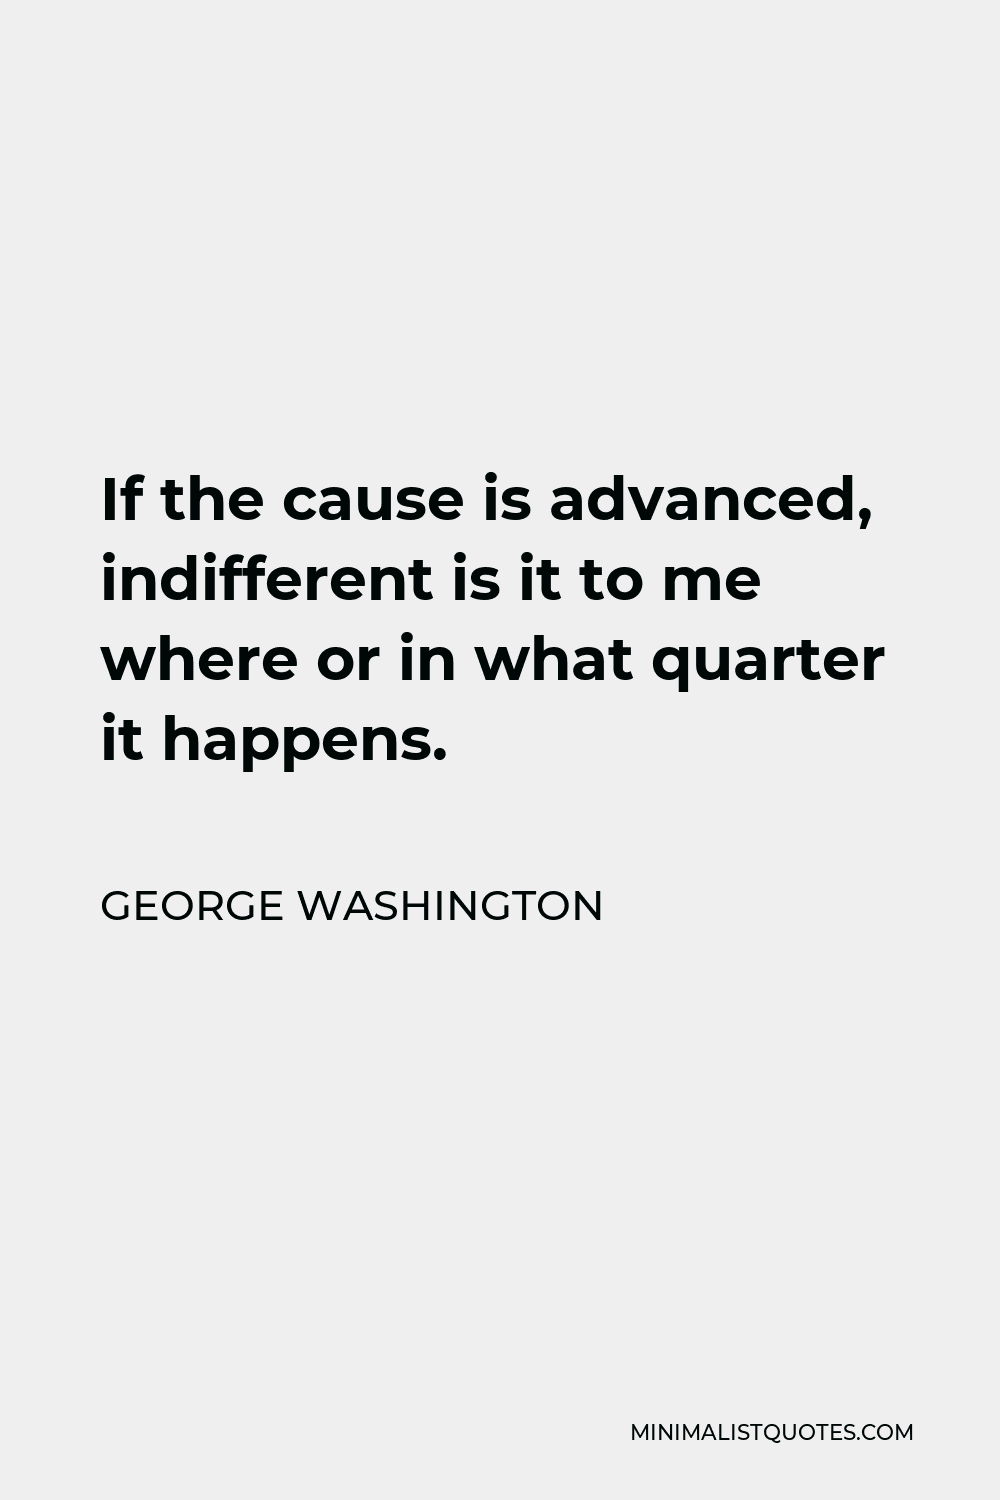 George Washington Quote - If the cause is advanced, indifferent is it to me where or in what quarter it happens.